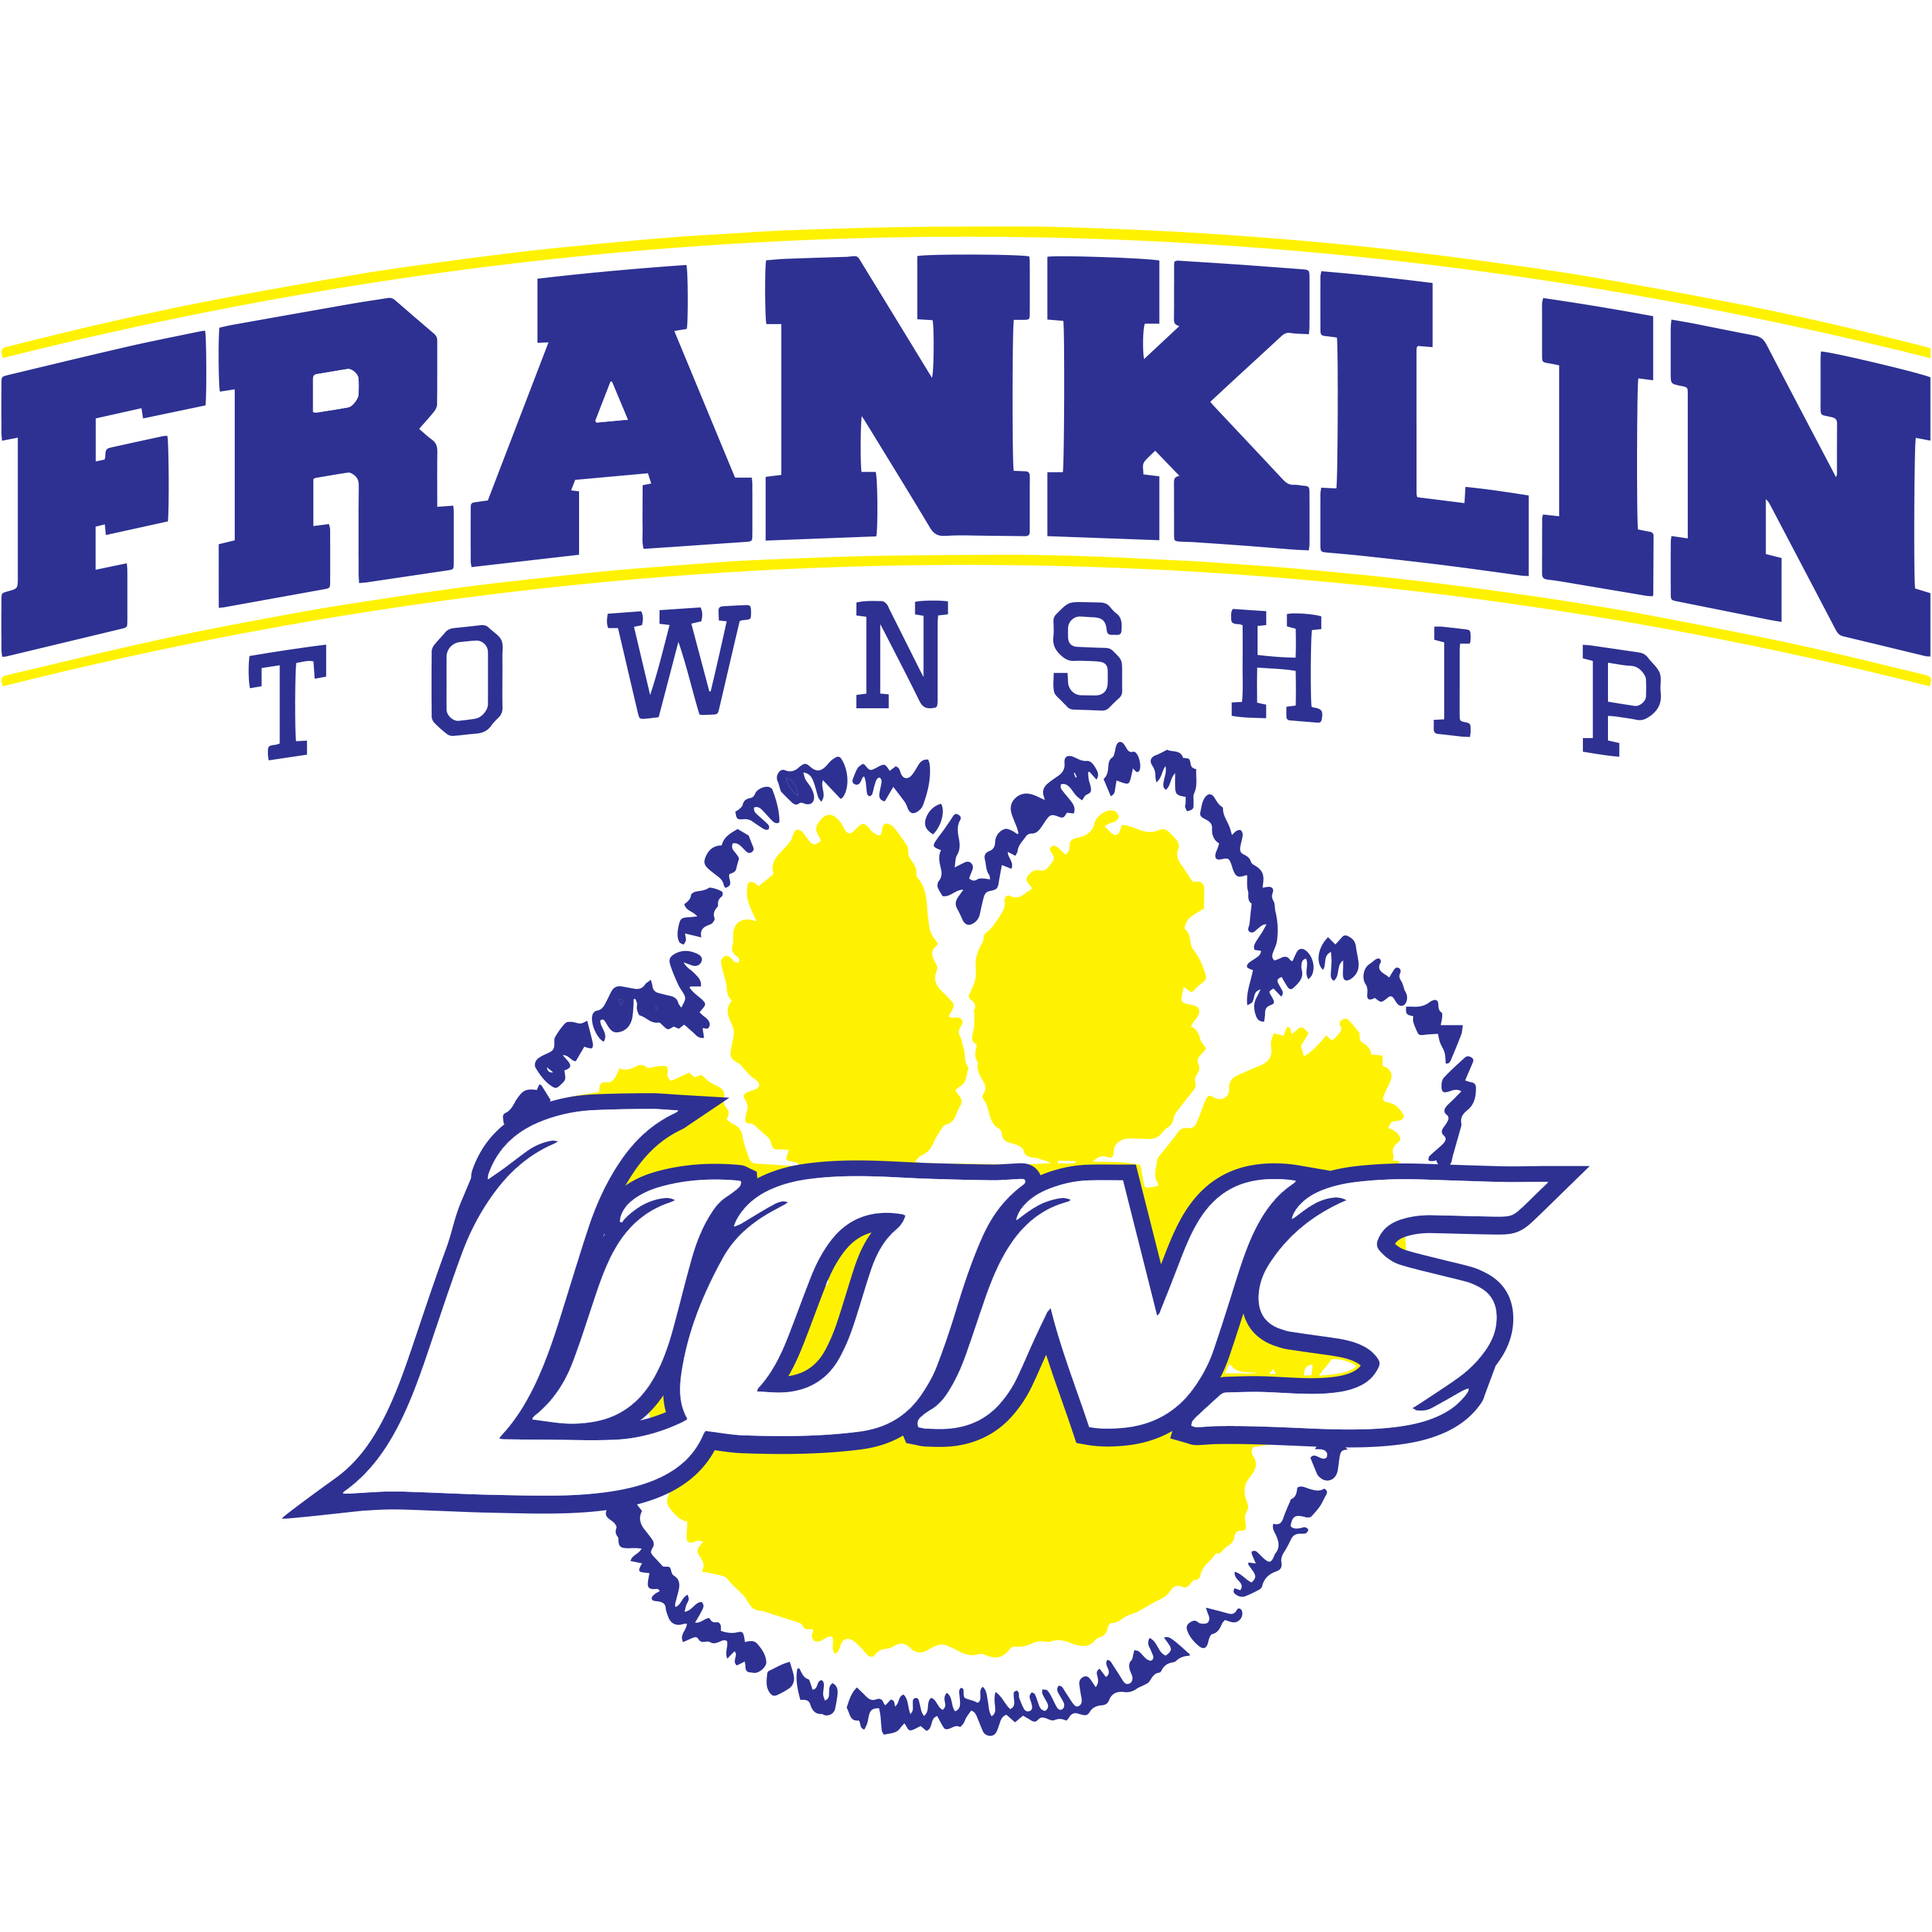 franklin township library events